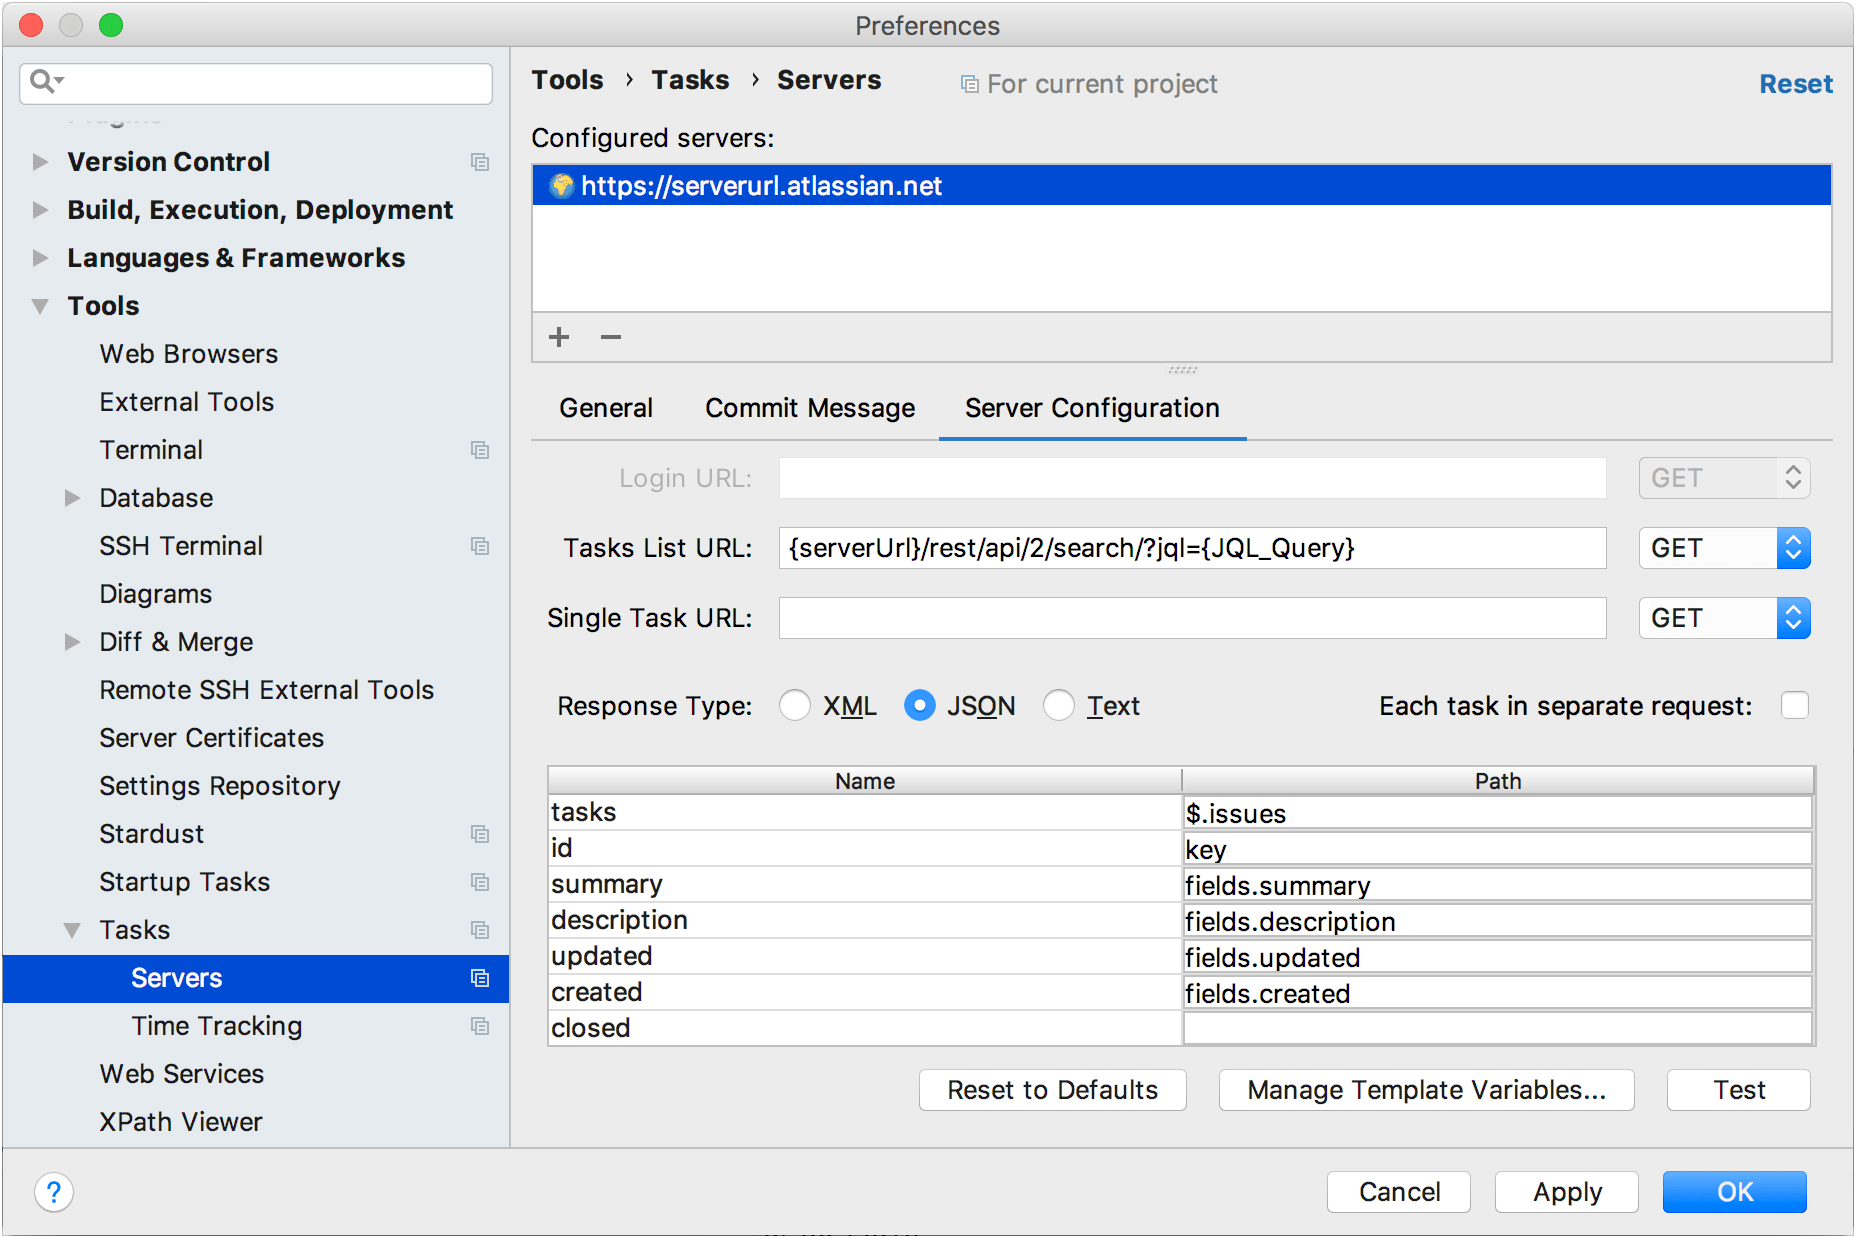 Configuring a response type and specifying selectors